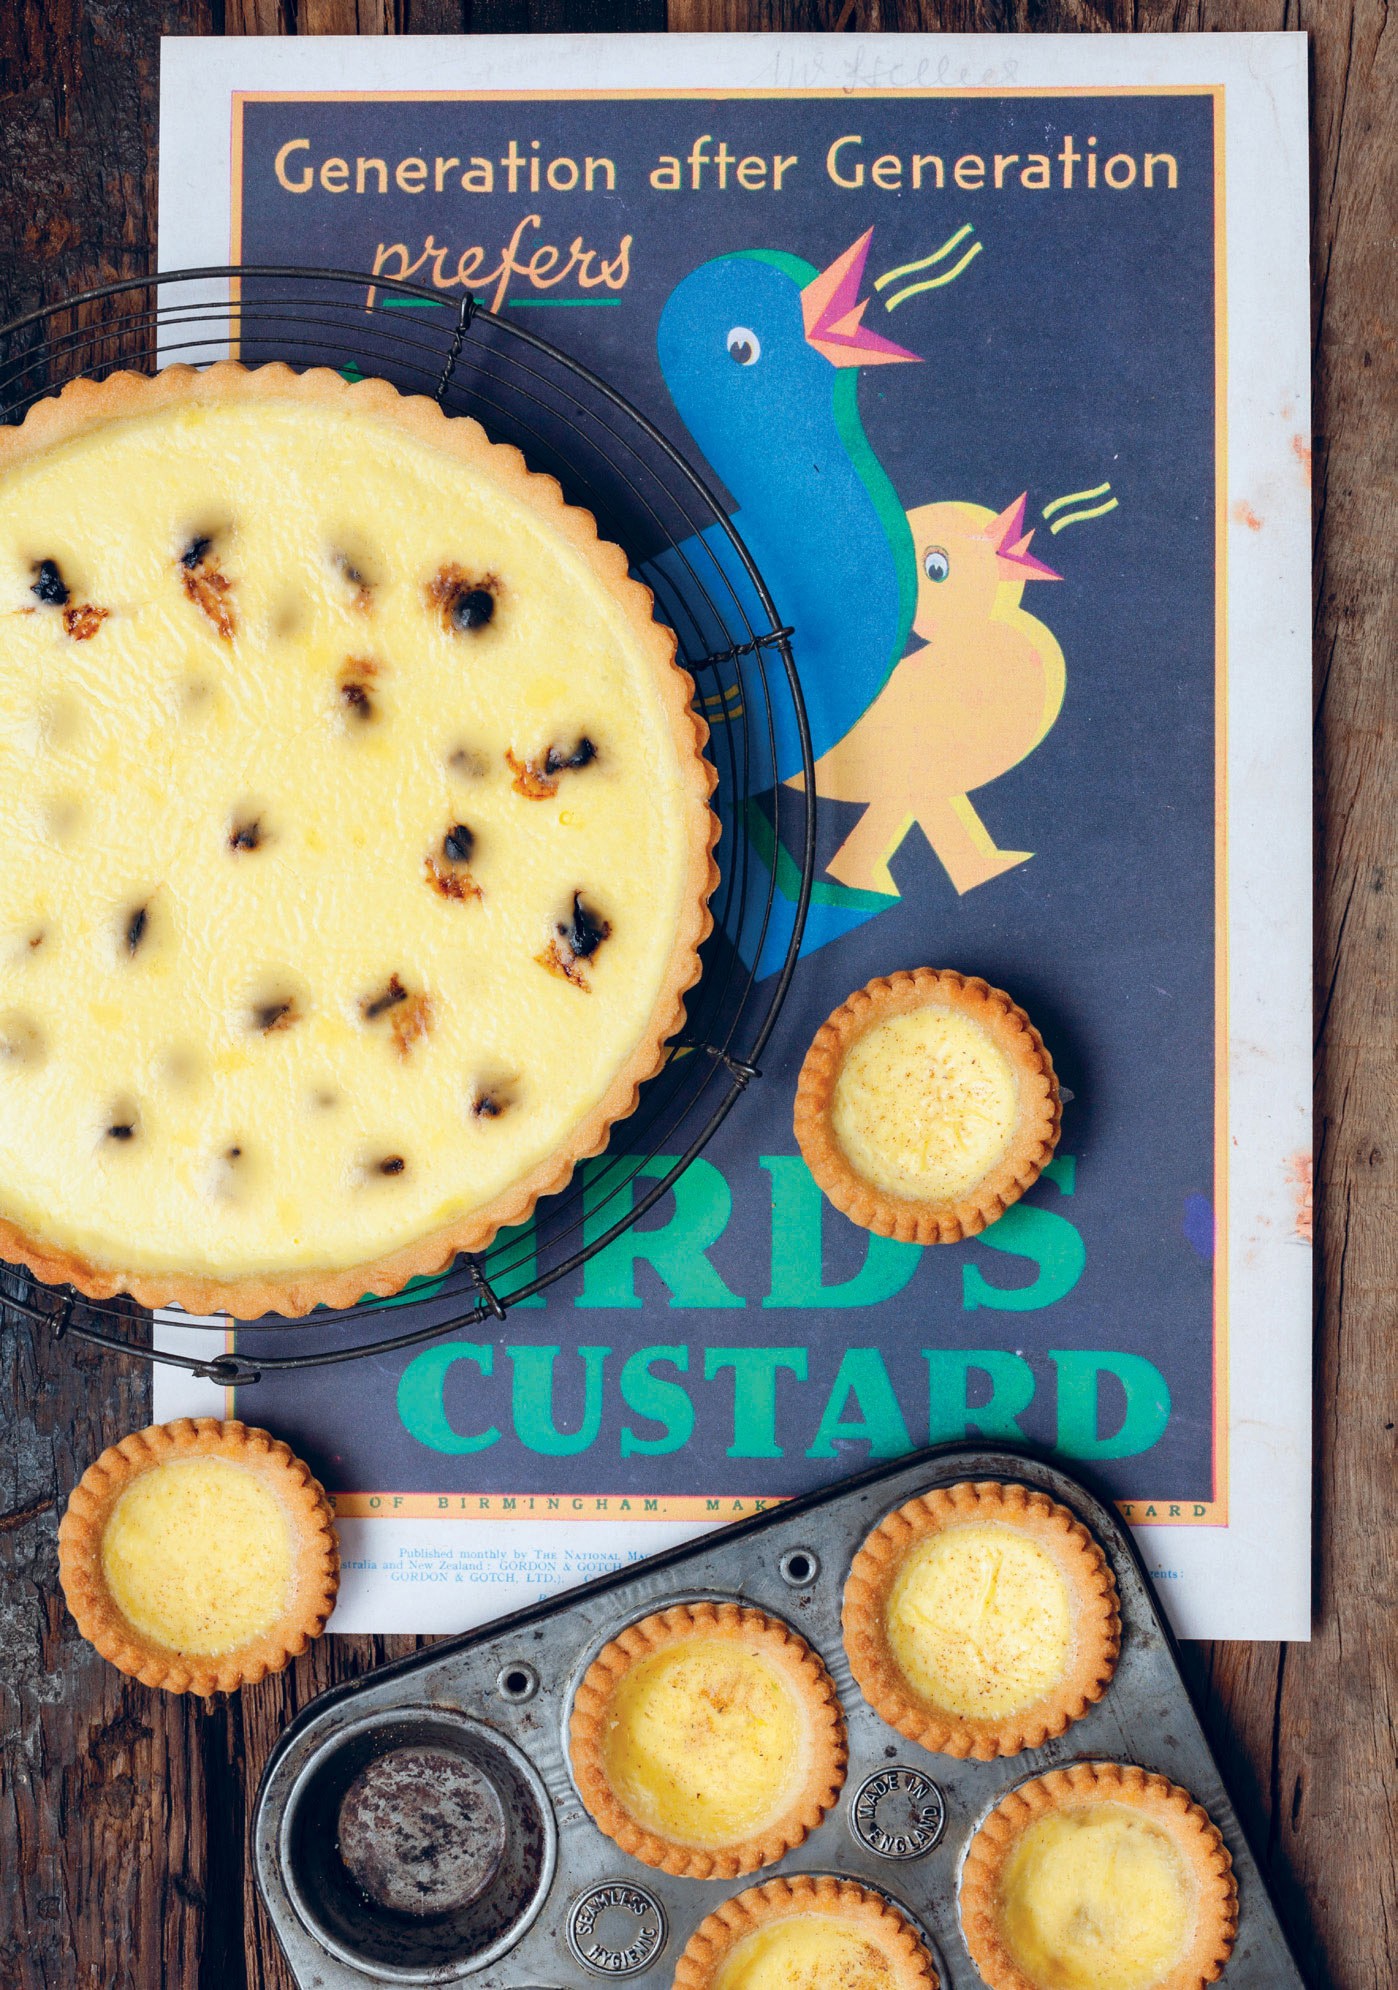 Custard tarts from Oats in the North, Wheat from the South: The history ...